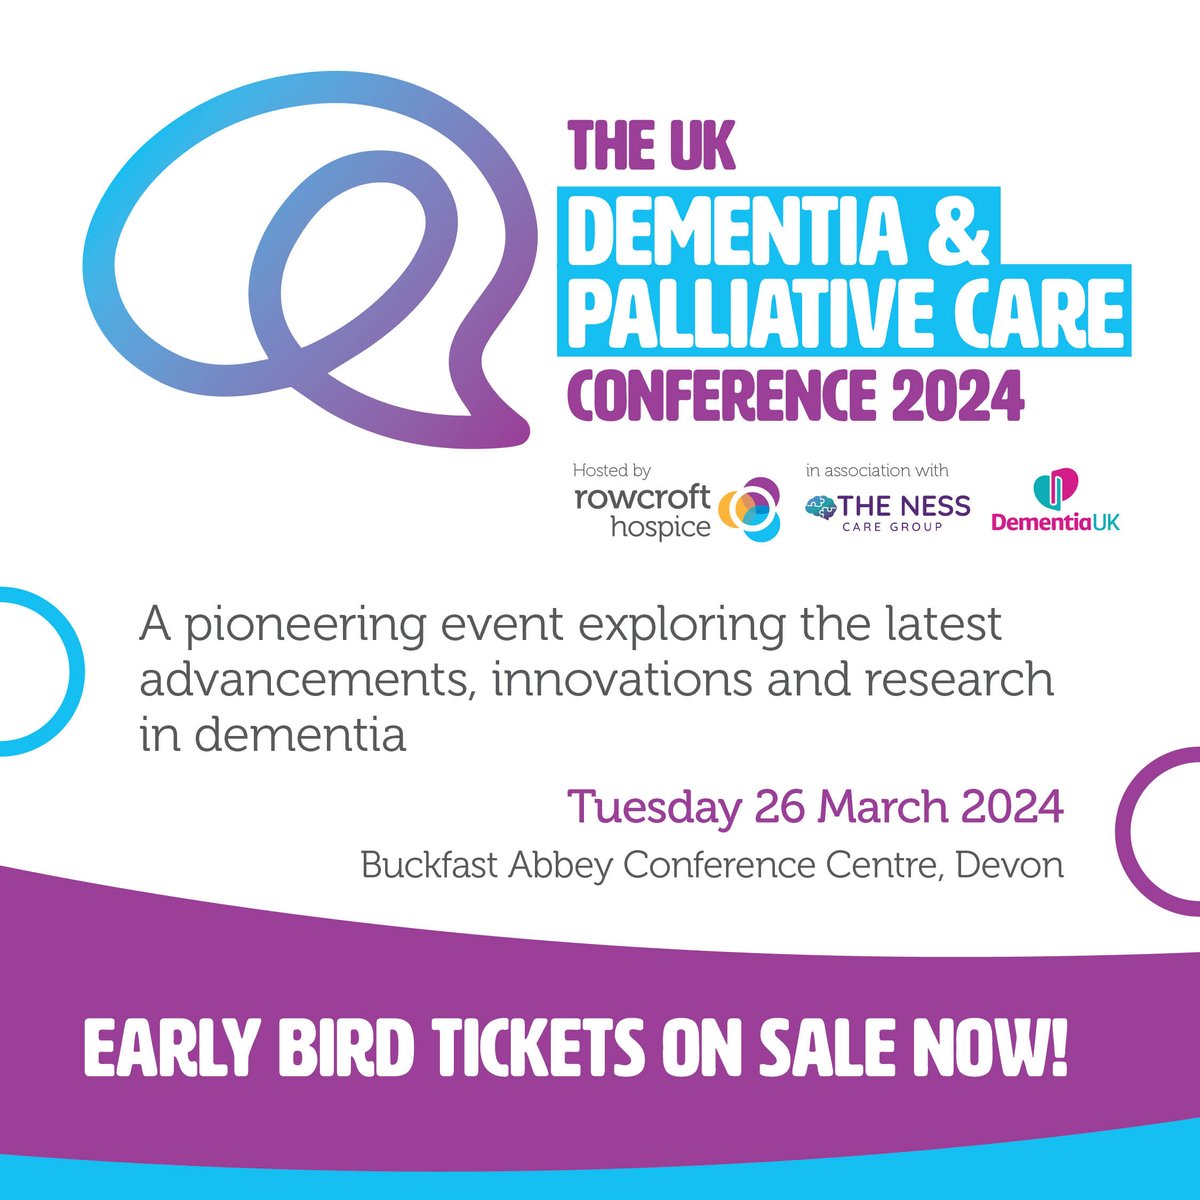 Tickets are now available to purchase for the UK Dementia & Palliative Care Conference on Tuesday March 26 2024 🎟️ Early bird tickets are available for £149 + VAT until the end of Jan & the full agenda can be viewed on our Eventbrite page: ow.ly/6jkA50Qk9aF.